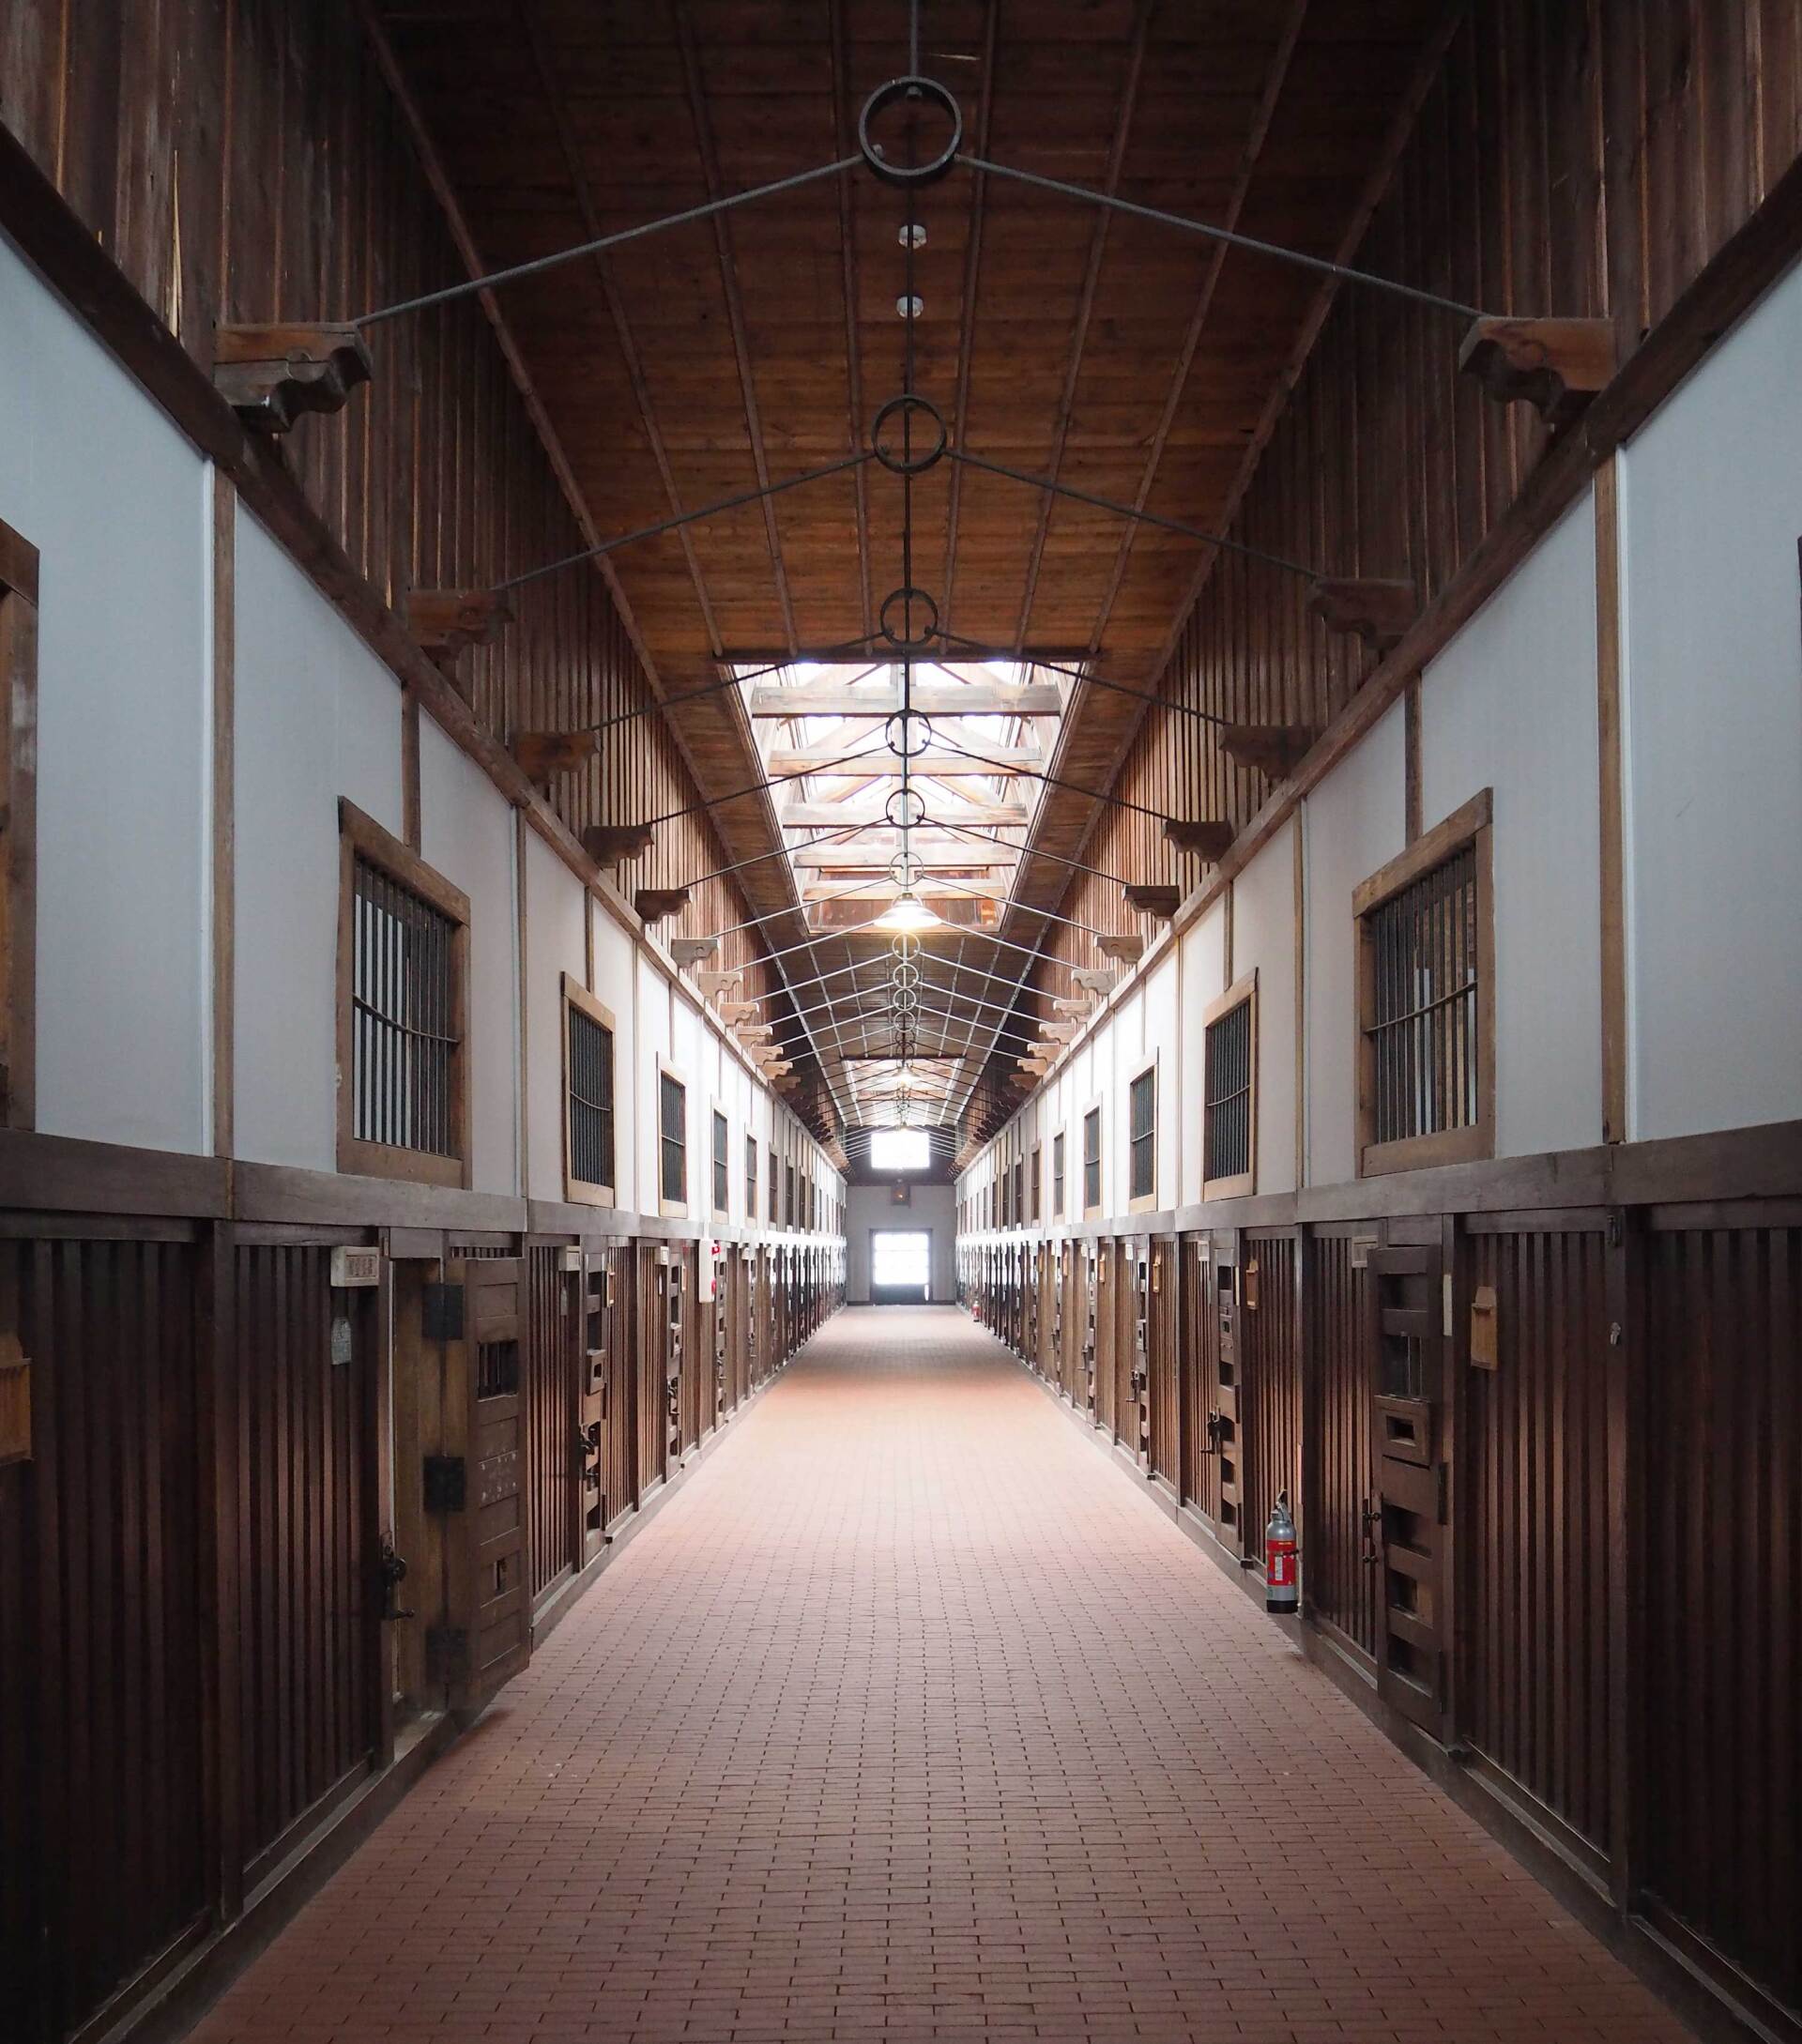 The main cell block at Abashiri Prison Museum